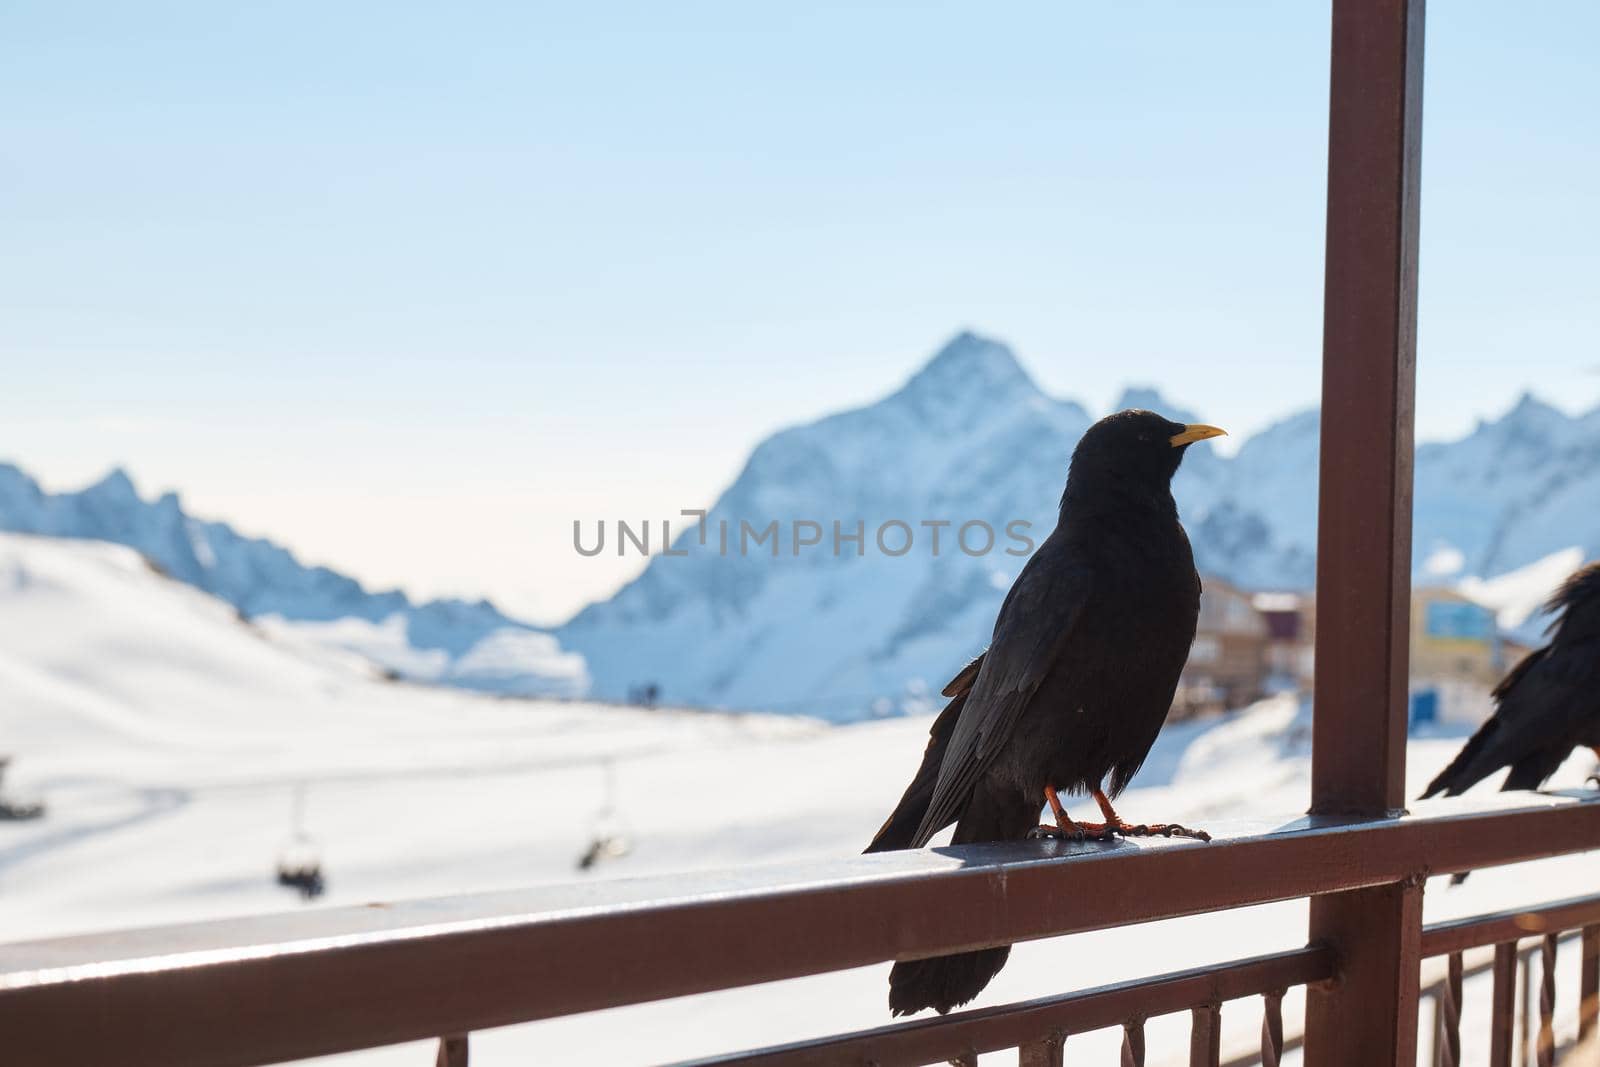 High quality photo about raven sitting on the railing, crow in the mountains, bird, blurred background, close-up